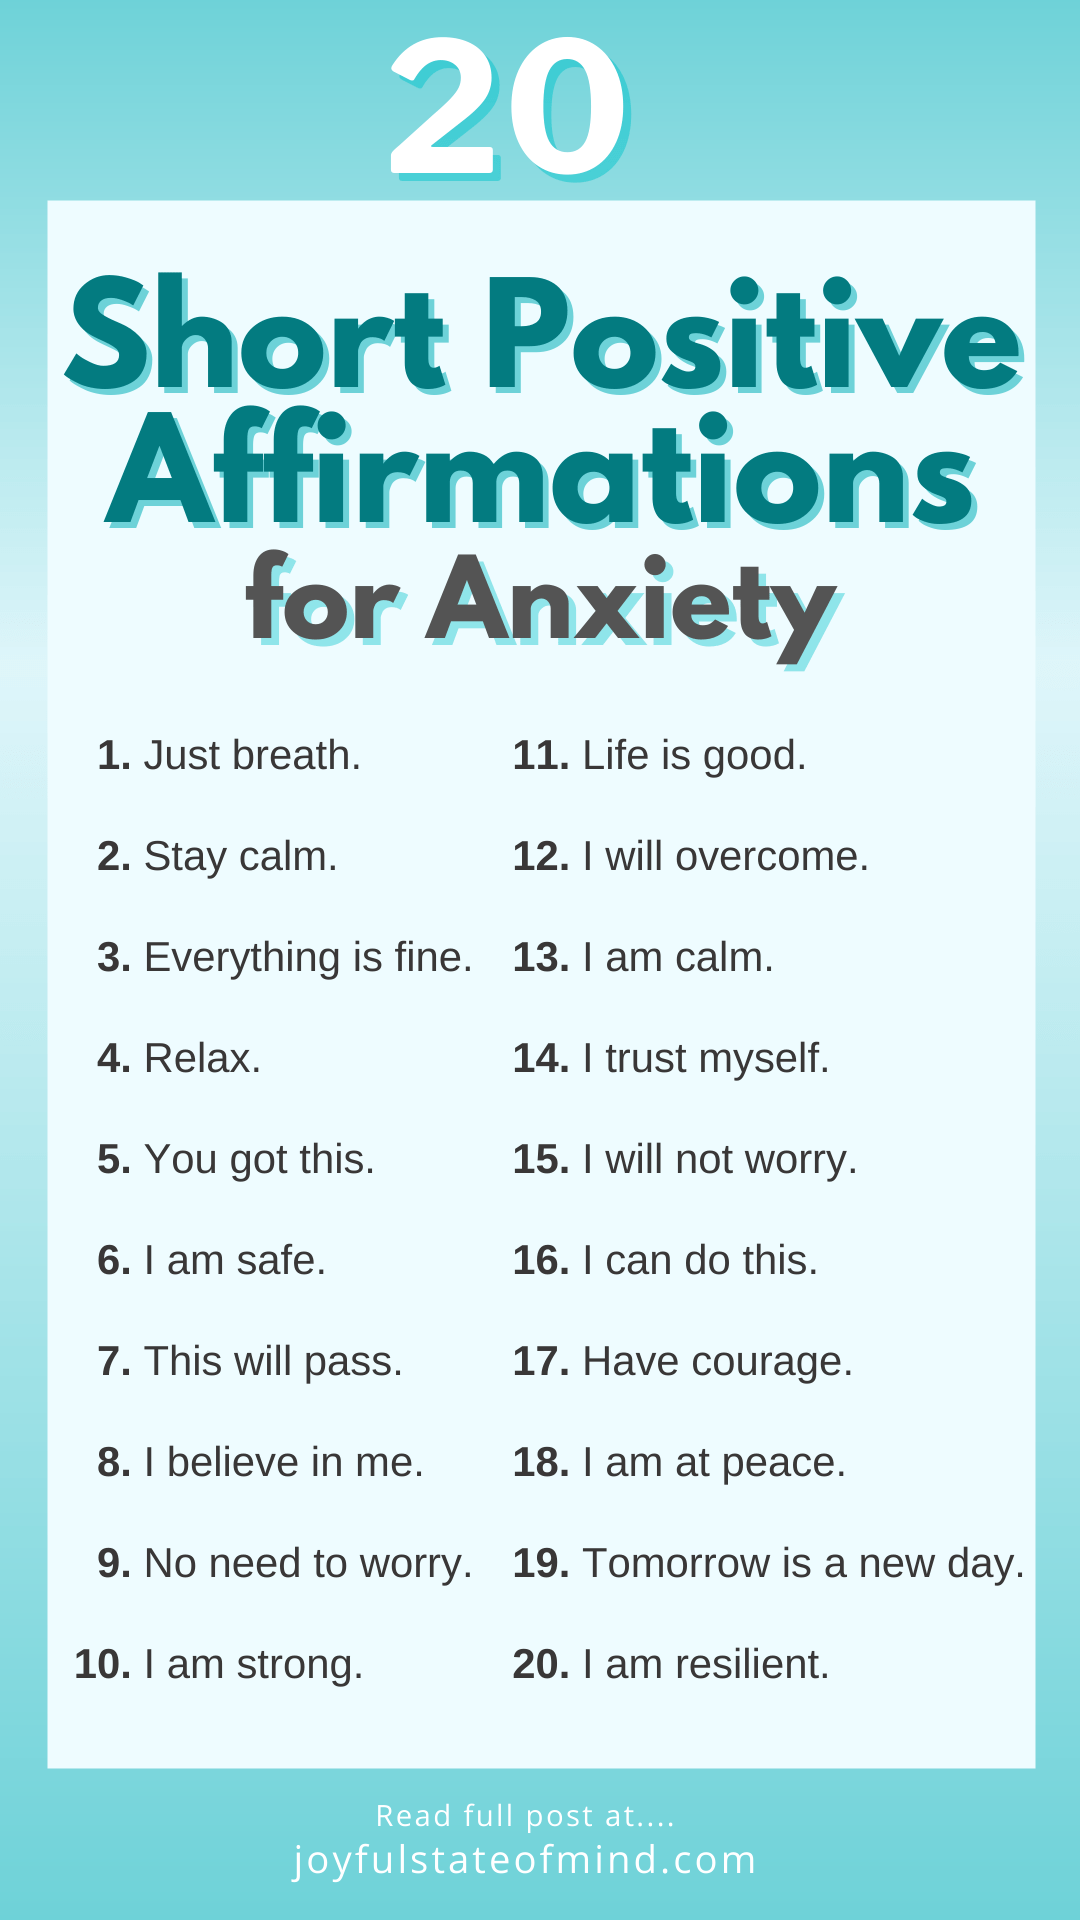 affirmations for anxiety